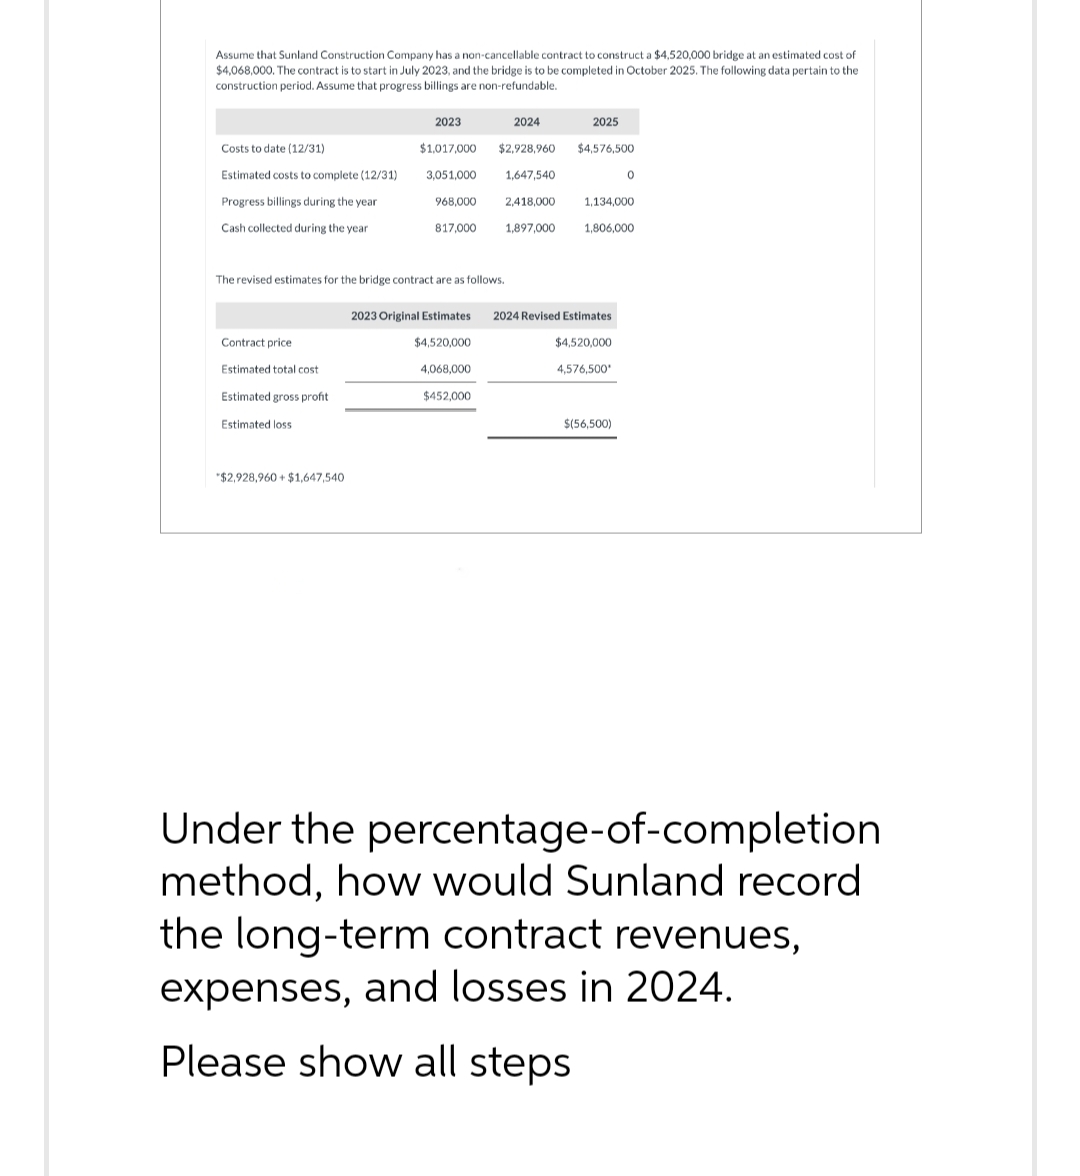 Assume that Sunland Construction Company has a non-cancellable contract to construct a $4,520,000 bridge at an estimated cost of
$4,068,000. The contract is to start in July 2023, and the bridge is to be completed in October 2025. The following data pertain to the
construction period. Assume that progress billings are non-refundable.
Costs to date (12/31)
Estimated costs to complete (12/31)
Progress billings during the year
Cash collected during the year
Contract price
Estimated total cost
Estimated gross profit
Estimated loss.
2023
*$2,928,960+ $1,647,540
$1,017,000
3,051,000
968,000
817,000
The revised estimates for the bridge contract are as follows.
2024
$2,928,960
1,647,540
2,418,000
1,897,000
2025
$4,576,500
1,134,000
0
1,806,000
2023 Original Estimates 2024 Revised Estimates
$4,520,000
$4,520,000
4,068,000
4,576,500*
$452,000
$(56,500)
Under the percentage-of-completion
method, how would Sunland record
the long-term contract revenues,
expenses, and losses in 2024.
Please show all steps